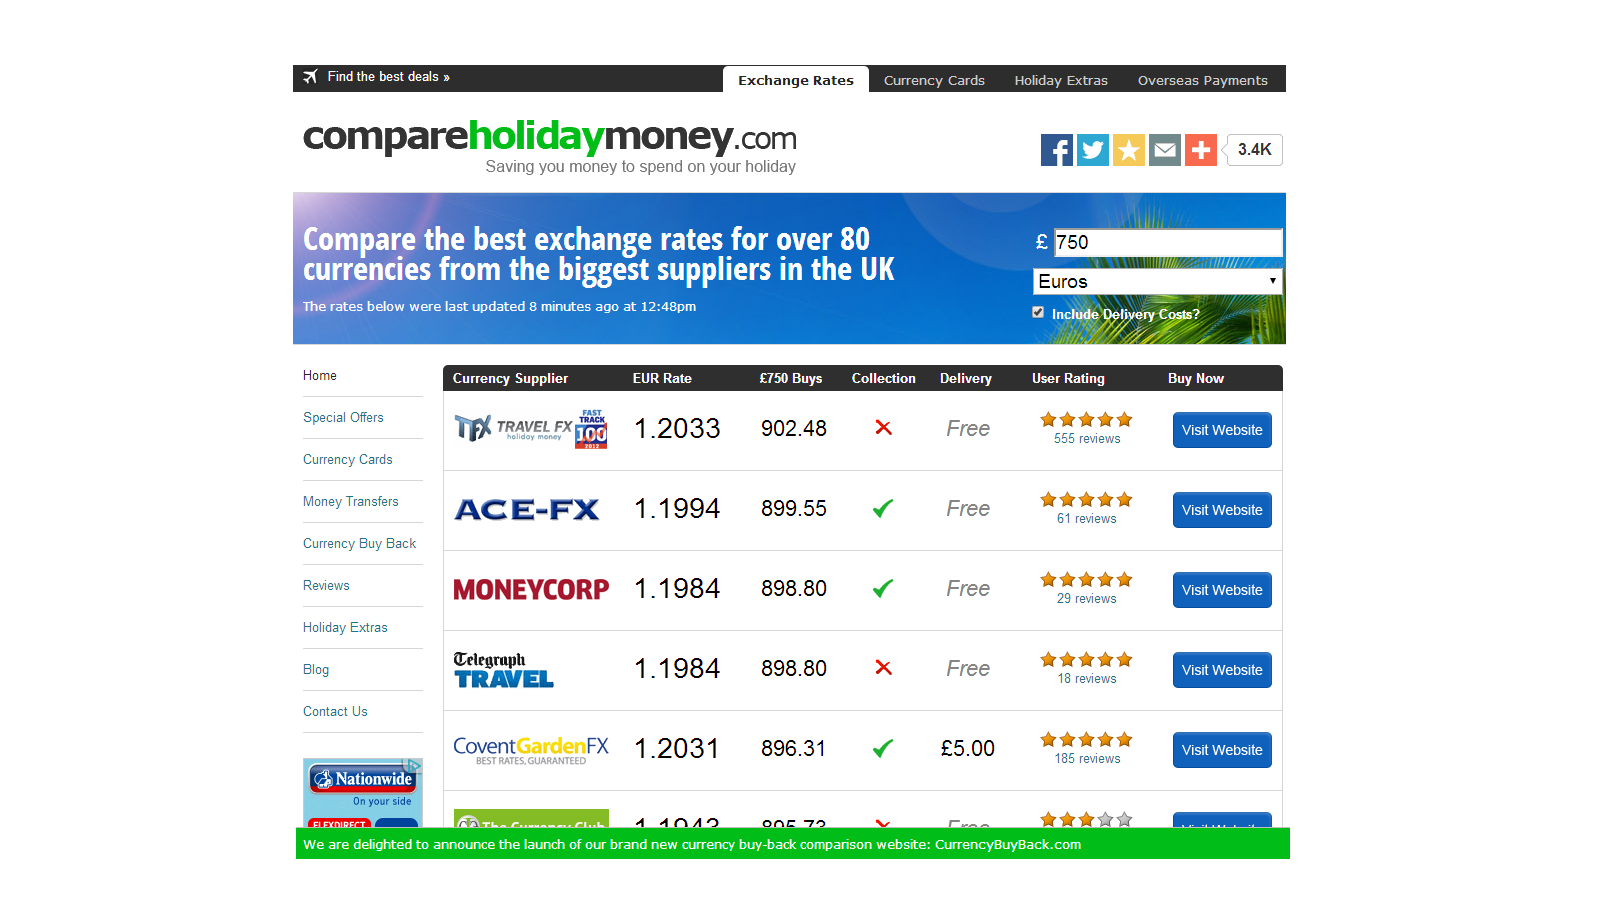 CompareHolidayMoney.com Grows by 37% in 2013